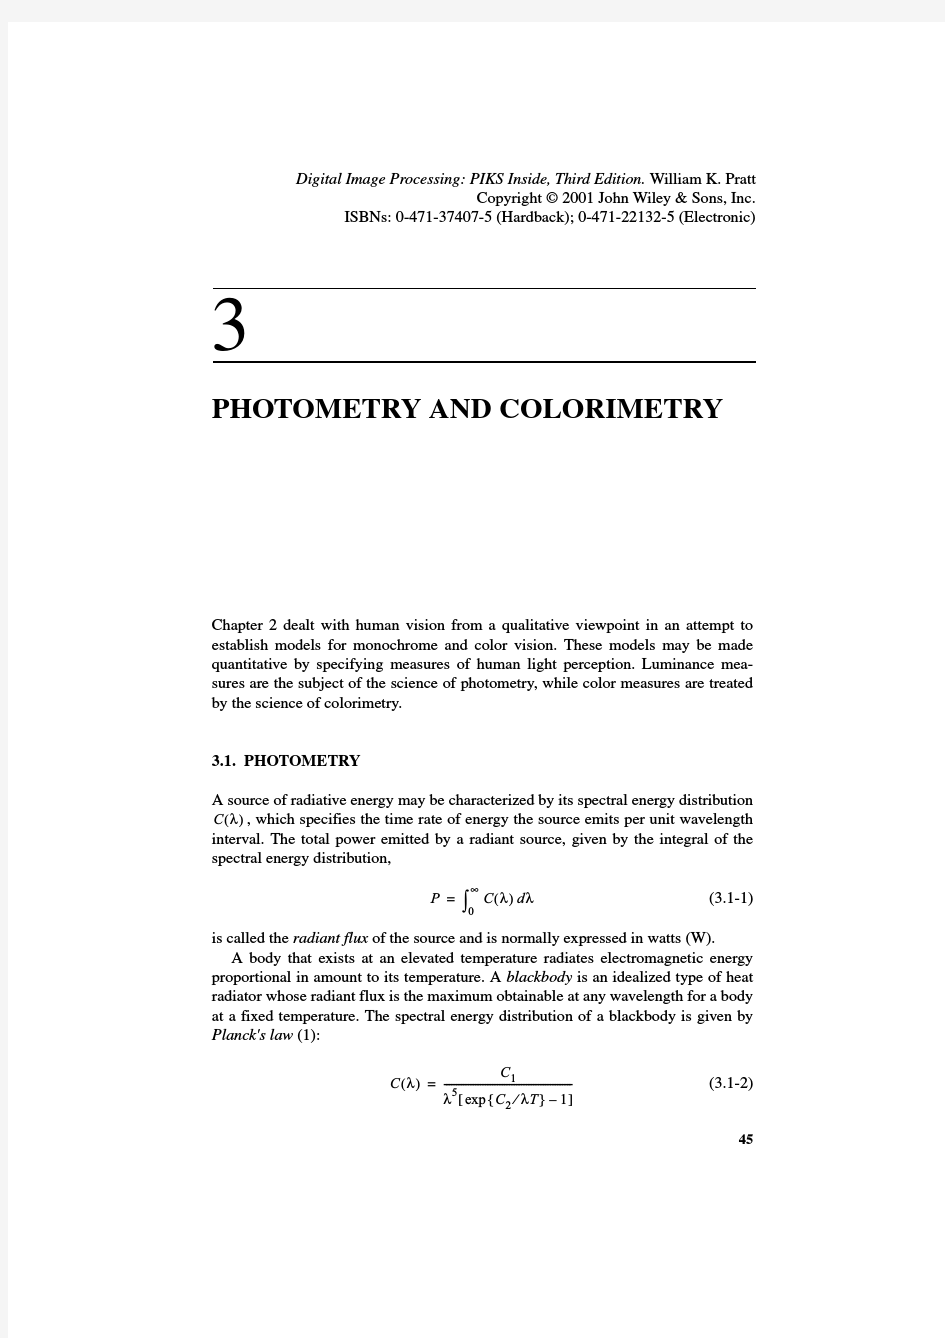 3 - Photometry and Colorimetry